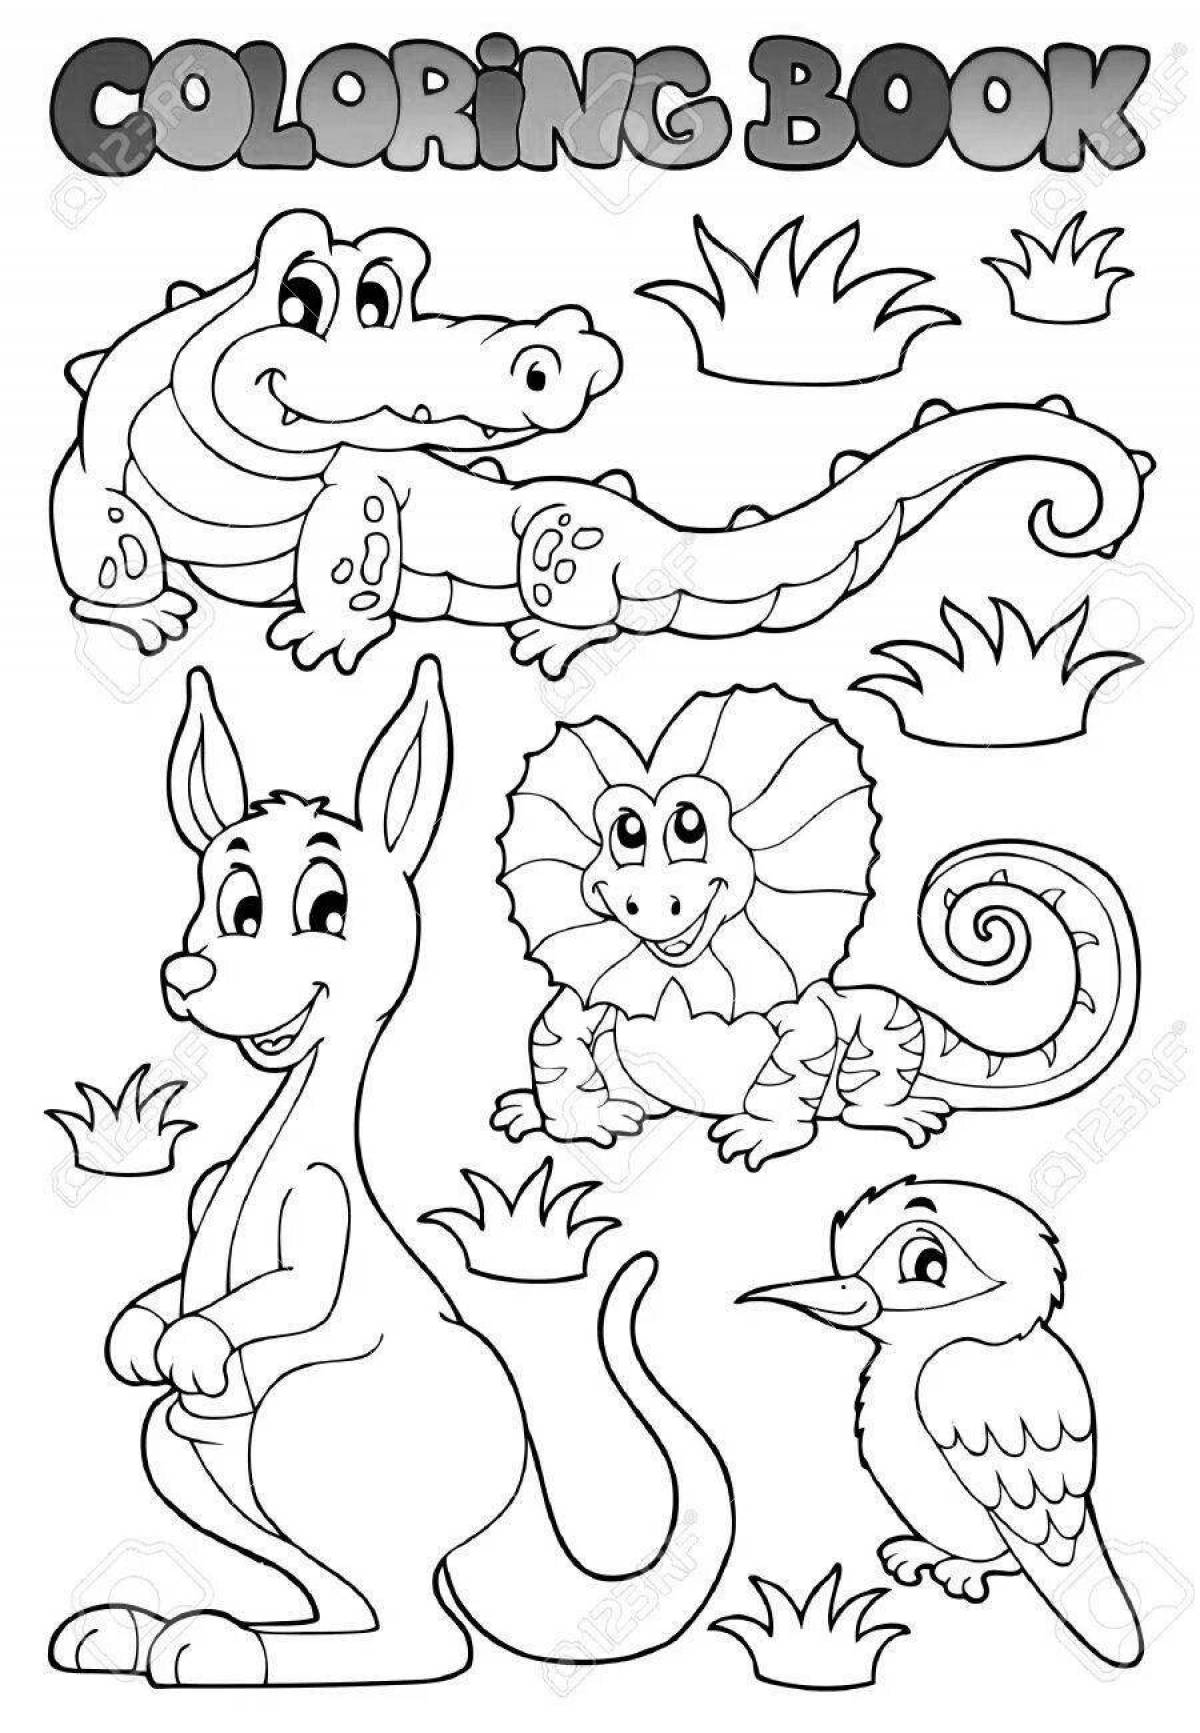 Australian quirky animal coloring book for preschoolers